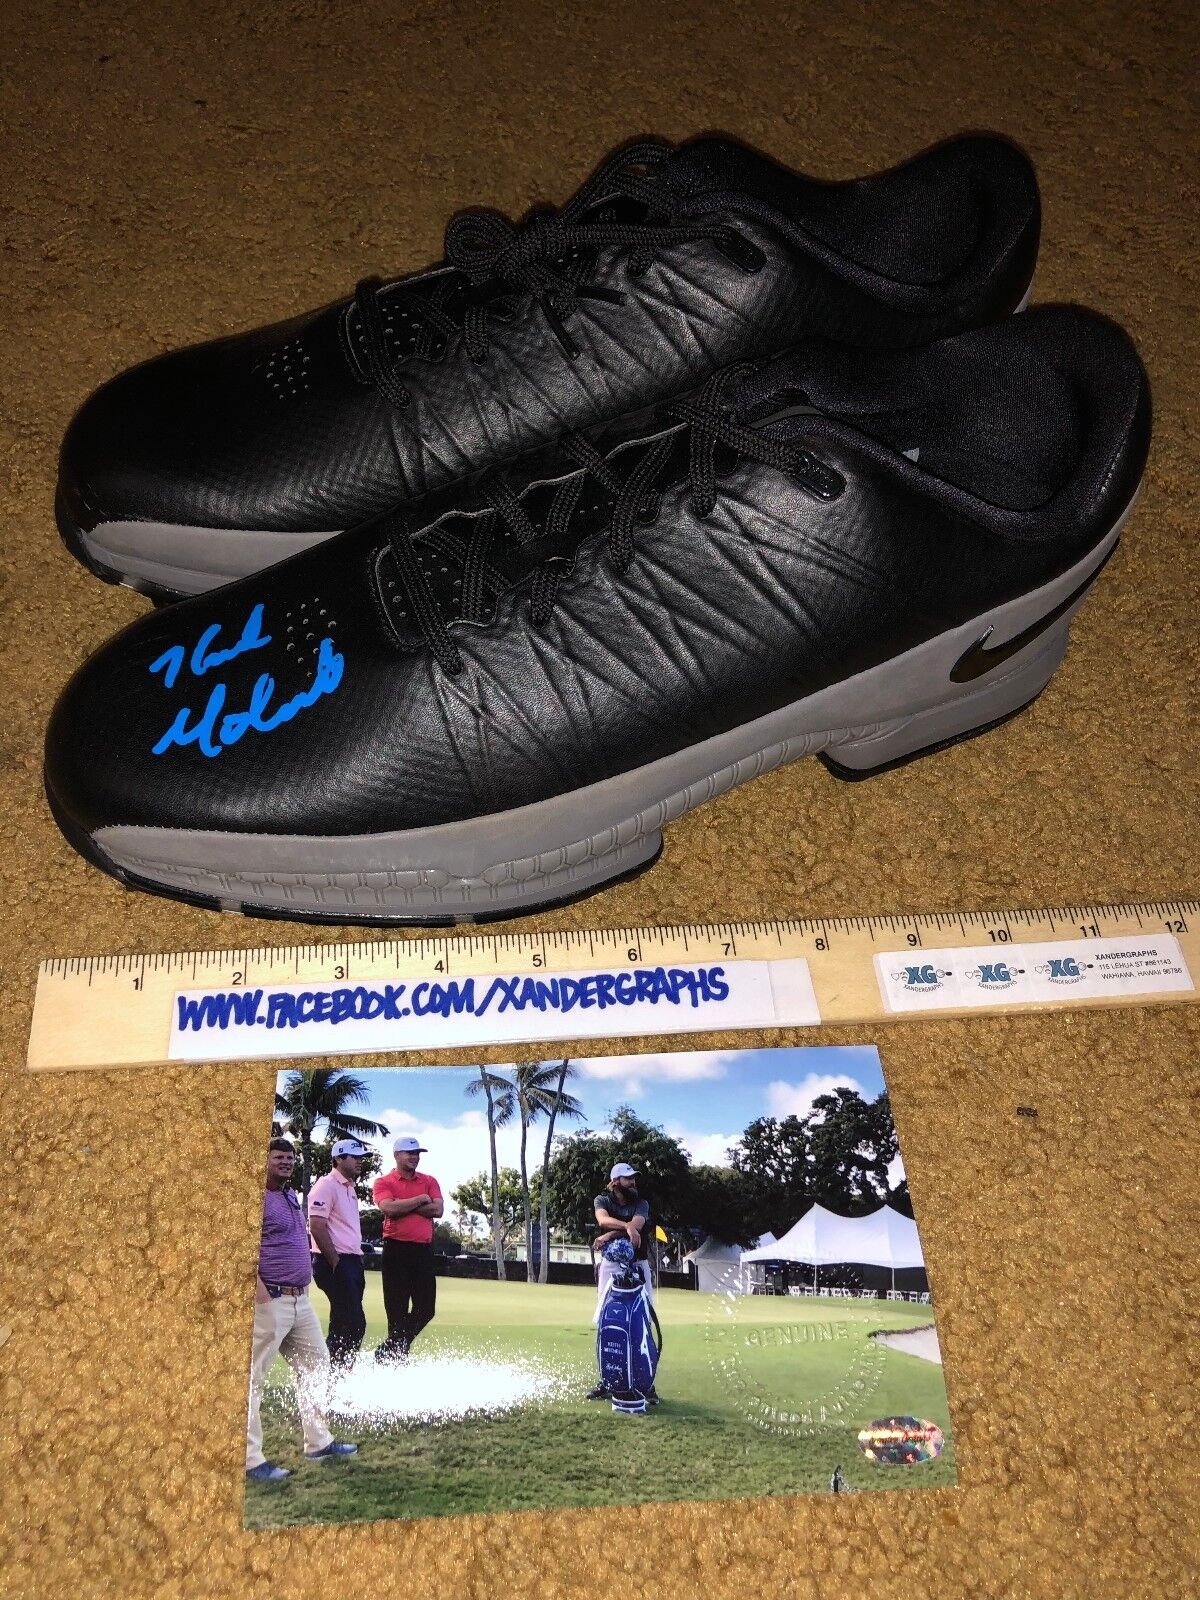 KEITH MITCHELL SIGNED AUTOGRAPHED NEW BLACK NIKE SHOES CLEATS GOLF-PROOF COA